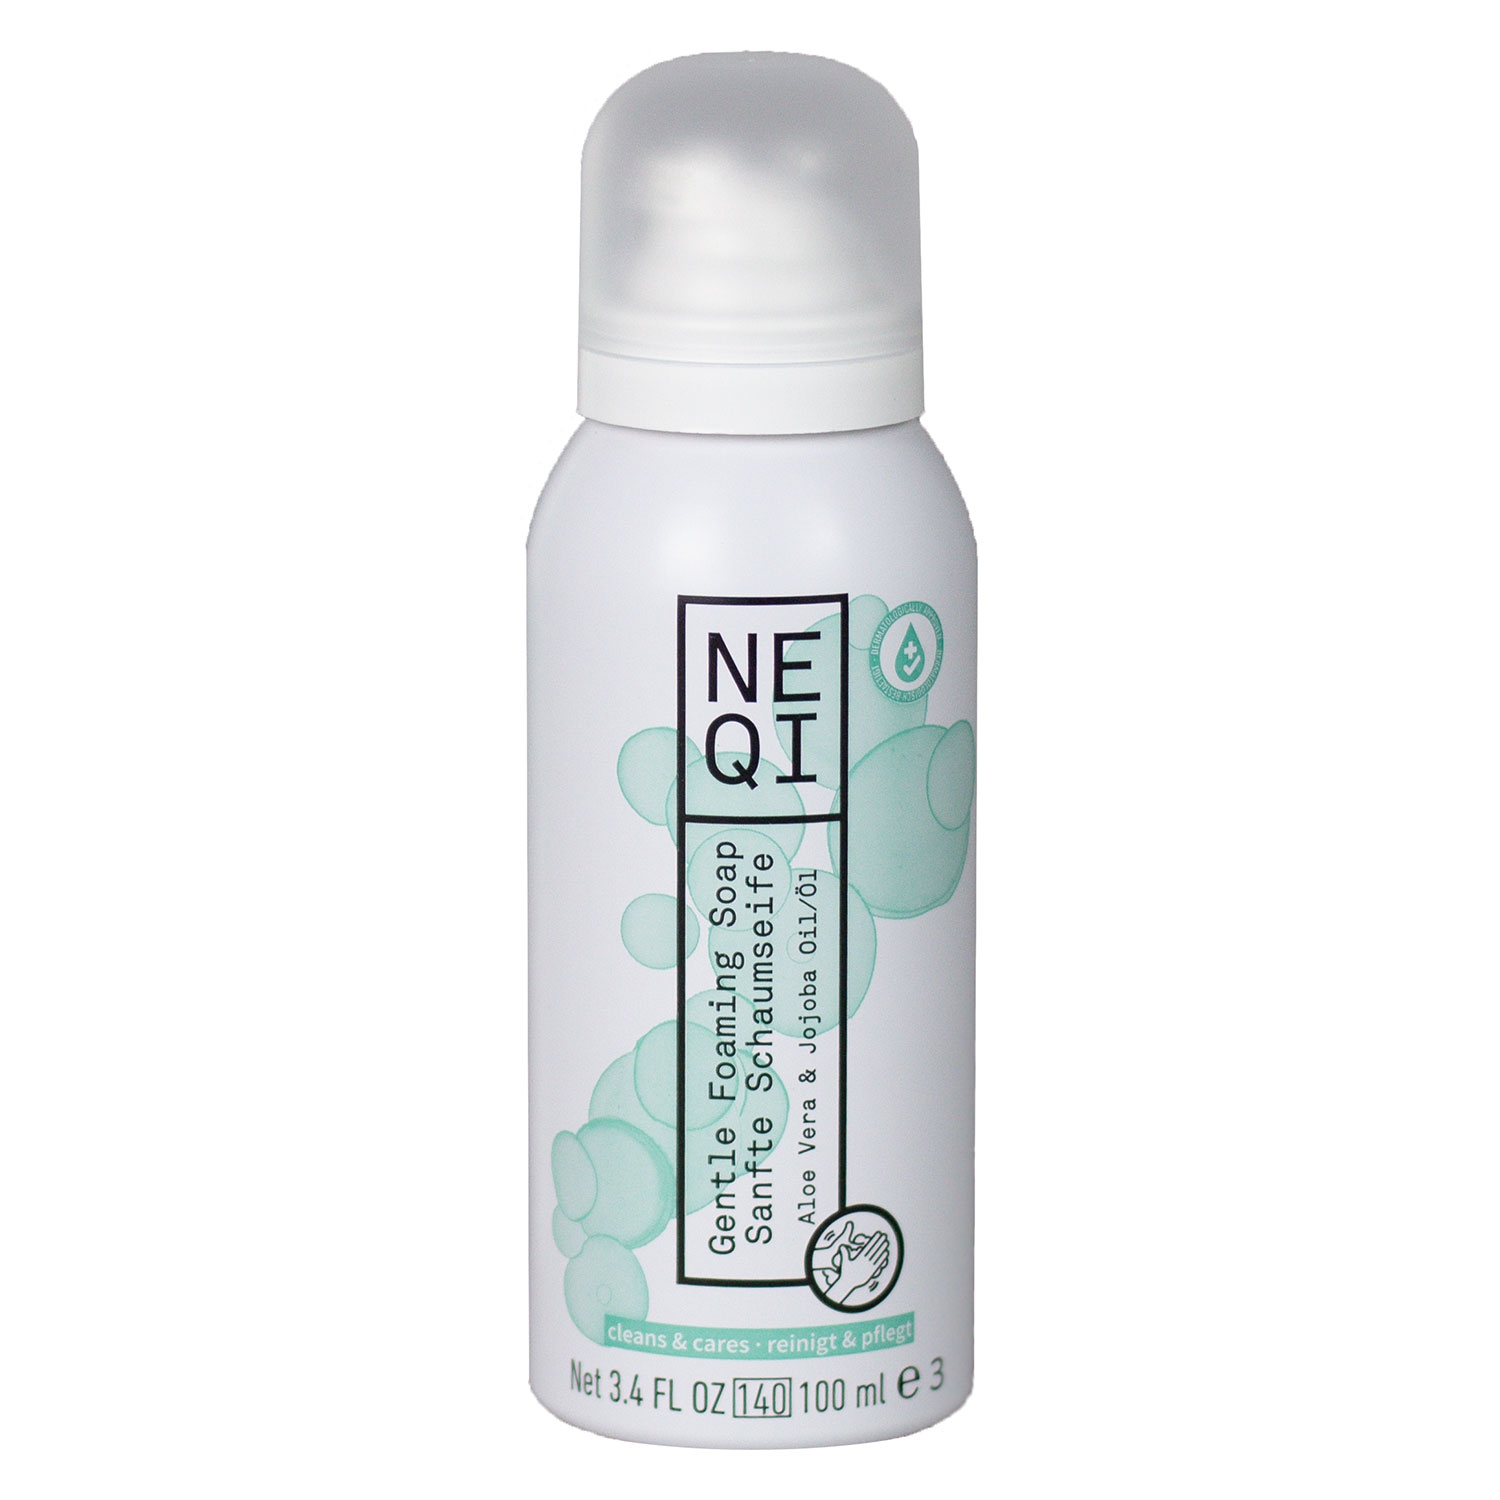 Product image from NEQI - Gentle Foaming Soap